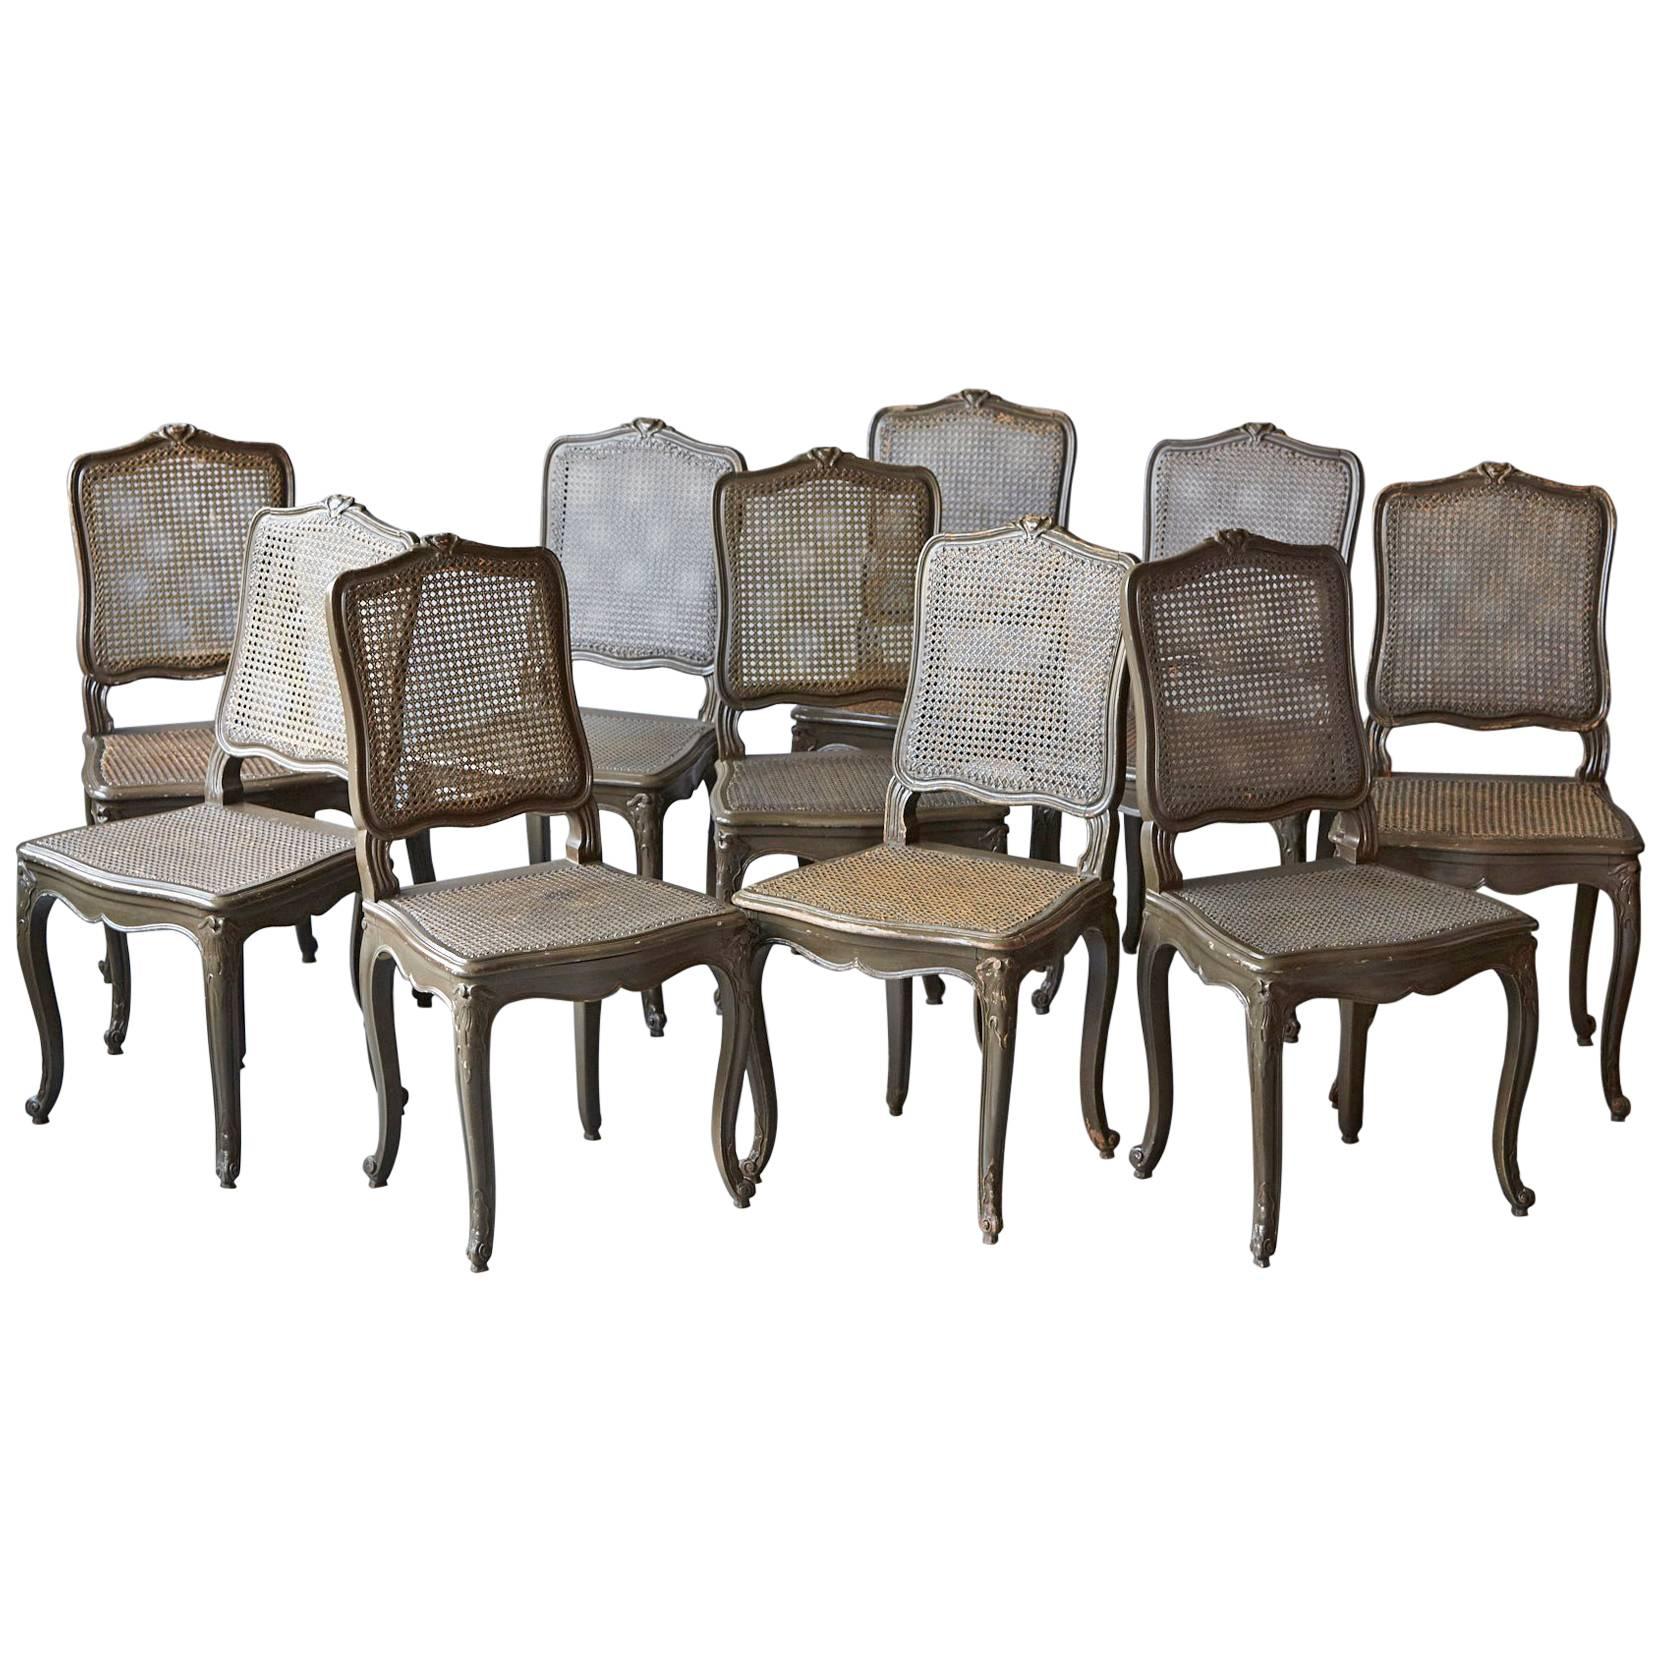 Set of Ten Early 20th Century French Provincial Country Style Dining Chairs